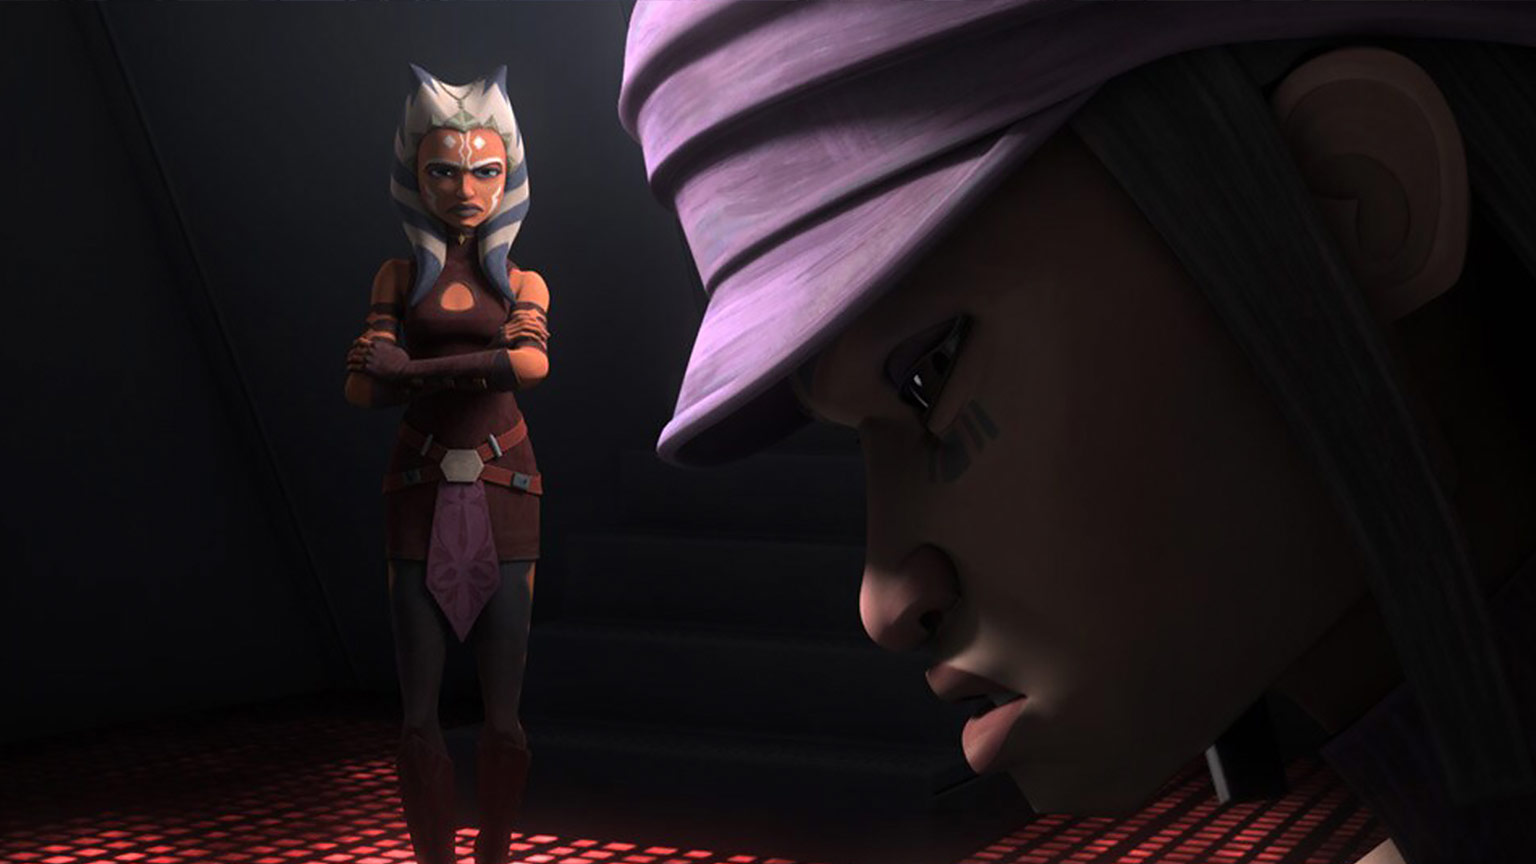 The Clone Wars Rewatch: A Murder Plot and “The Jedi Who Knew Too Much”